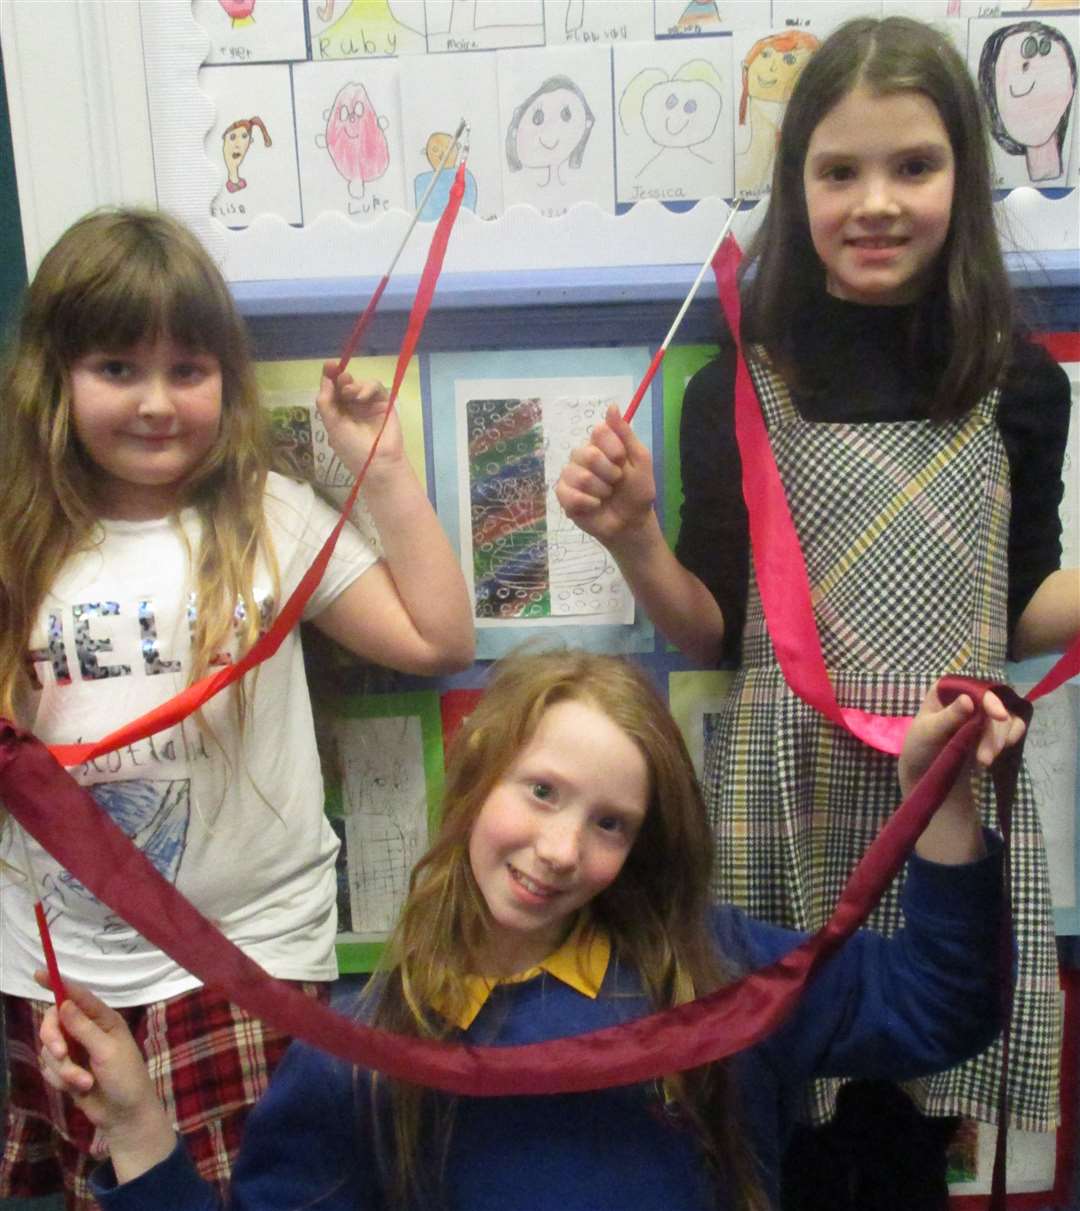 This group performed their own impressive gymnastics routine to Scottish music, using ribbons.